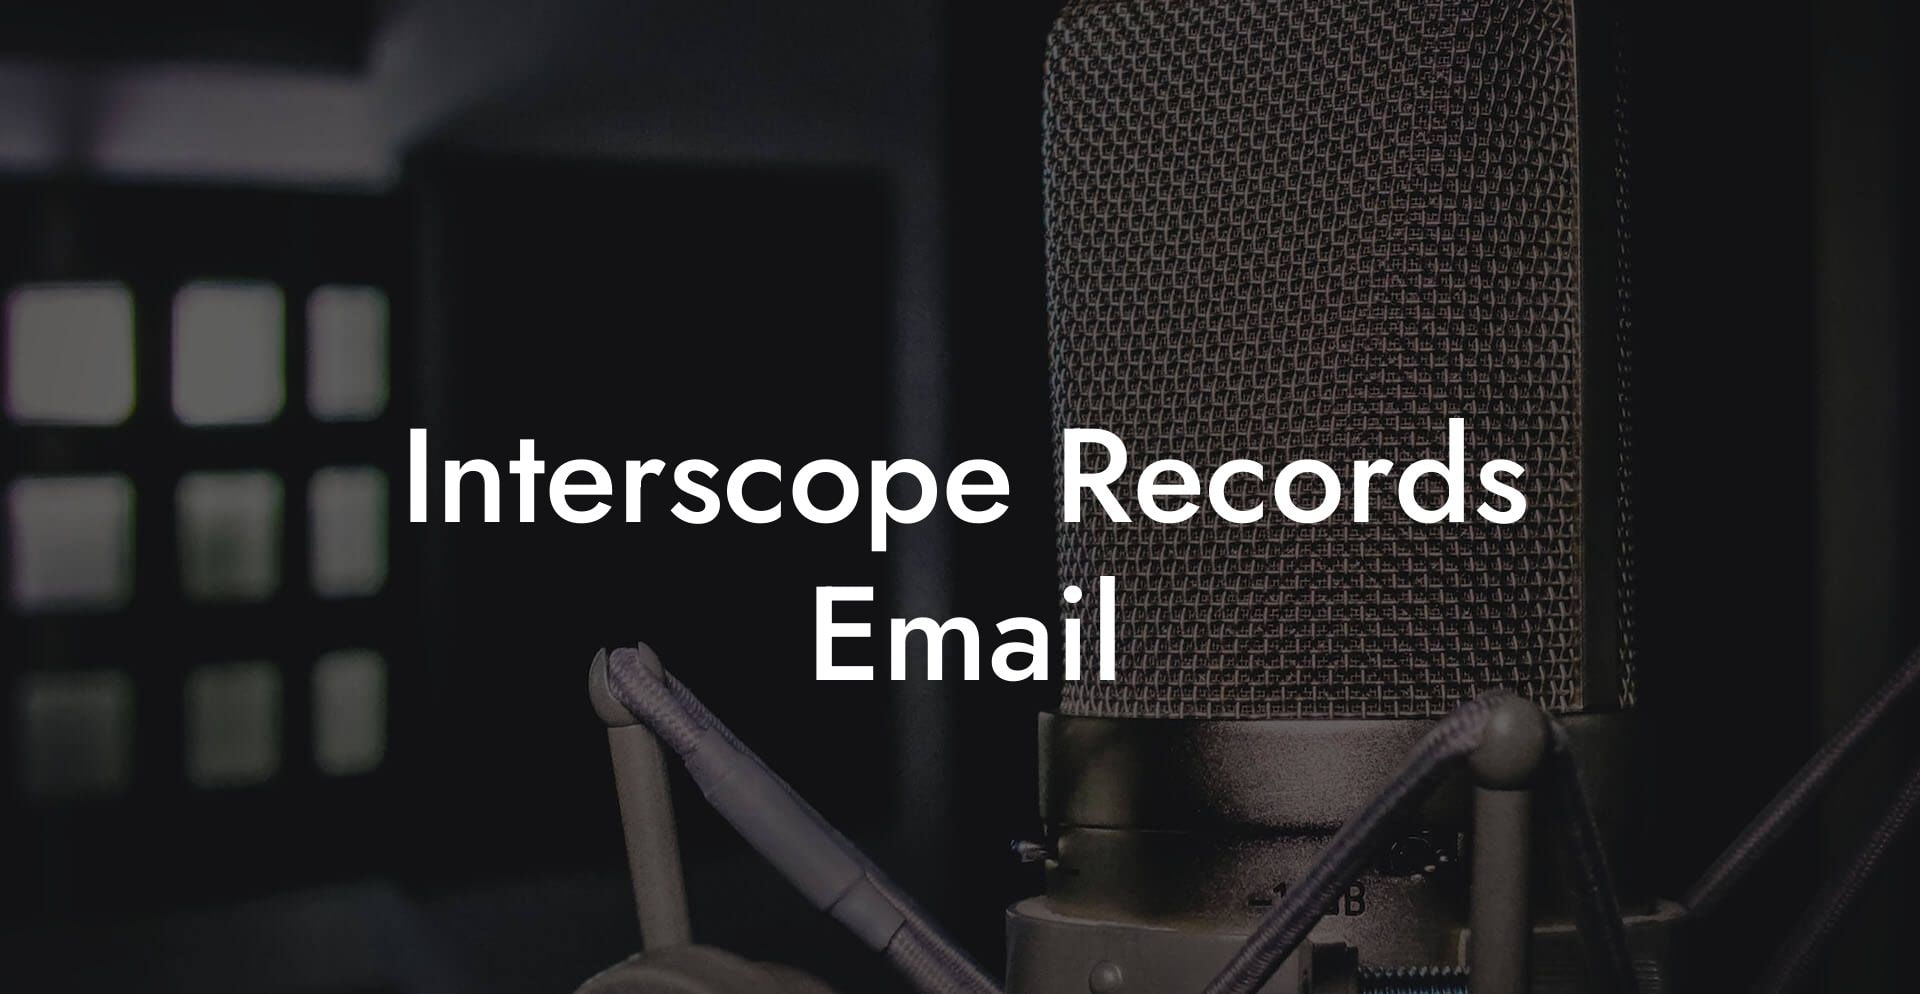 Interscope Records Email